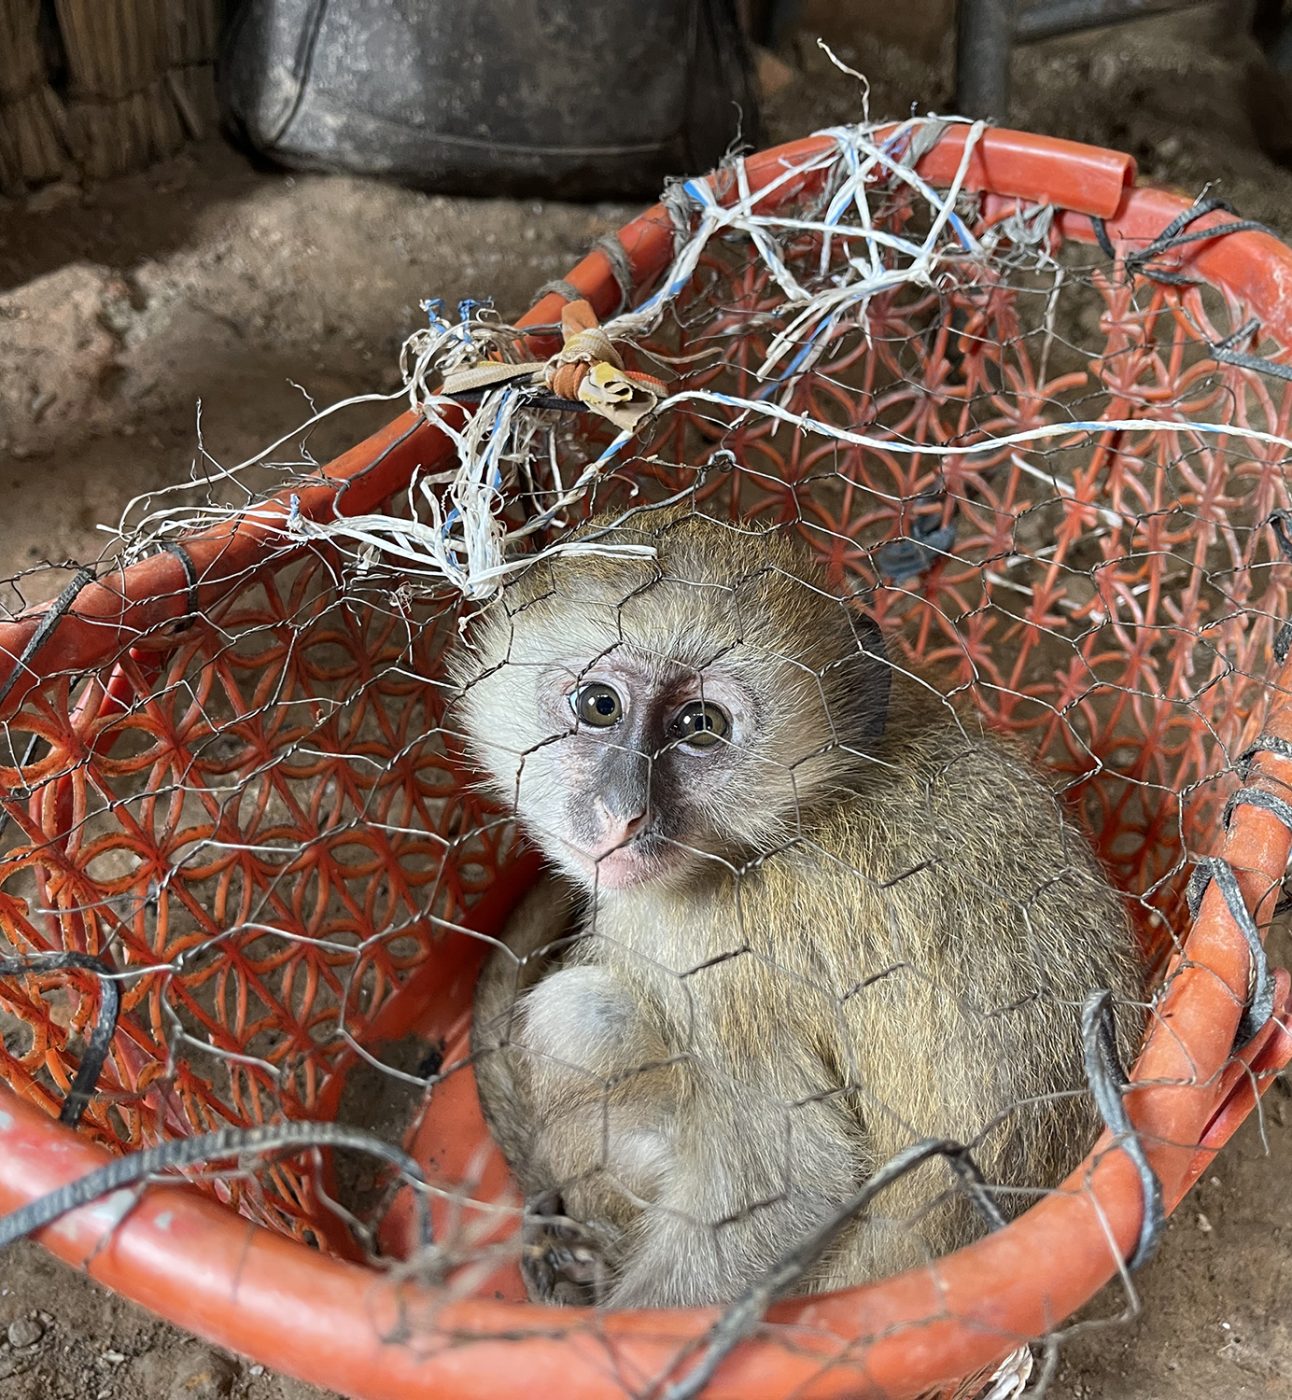 A vervet monkey is sat in a small red basket with netting over the top